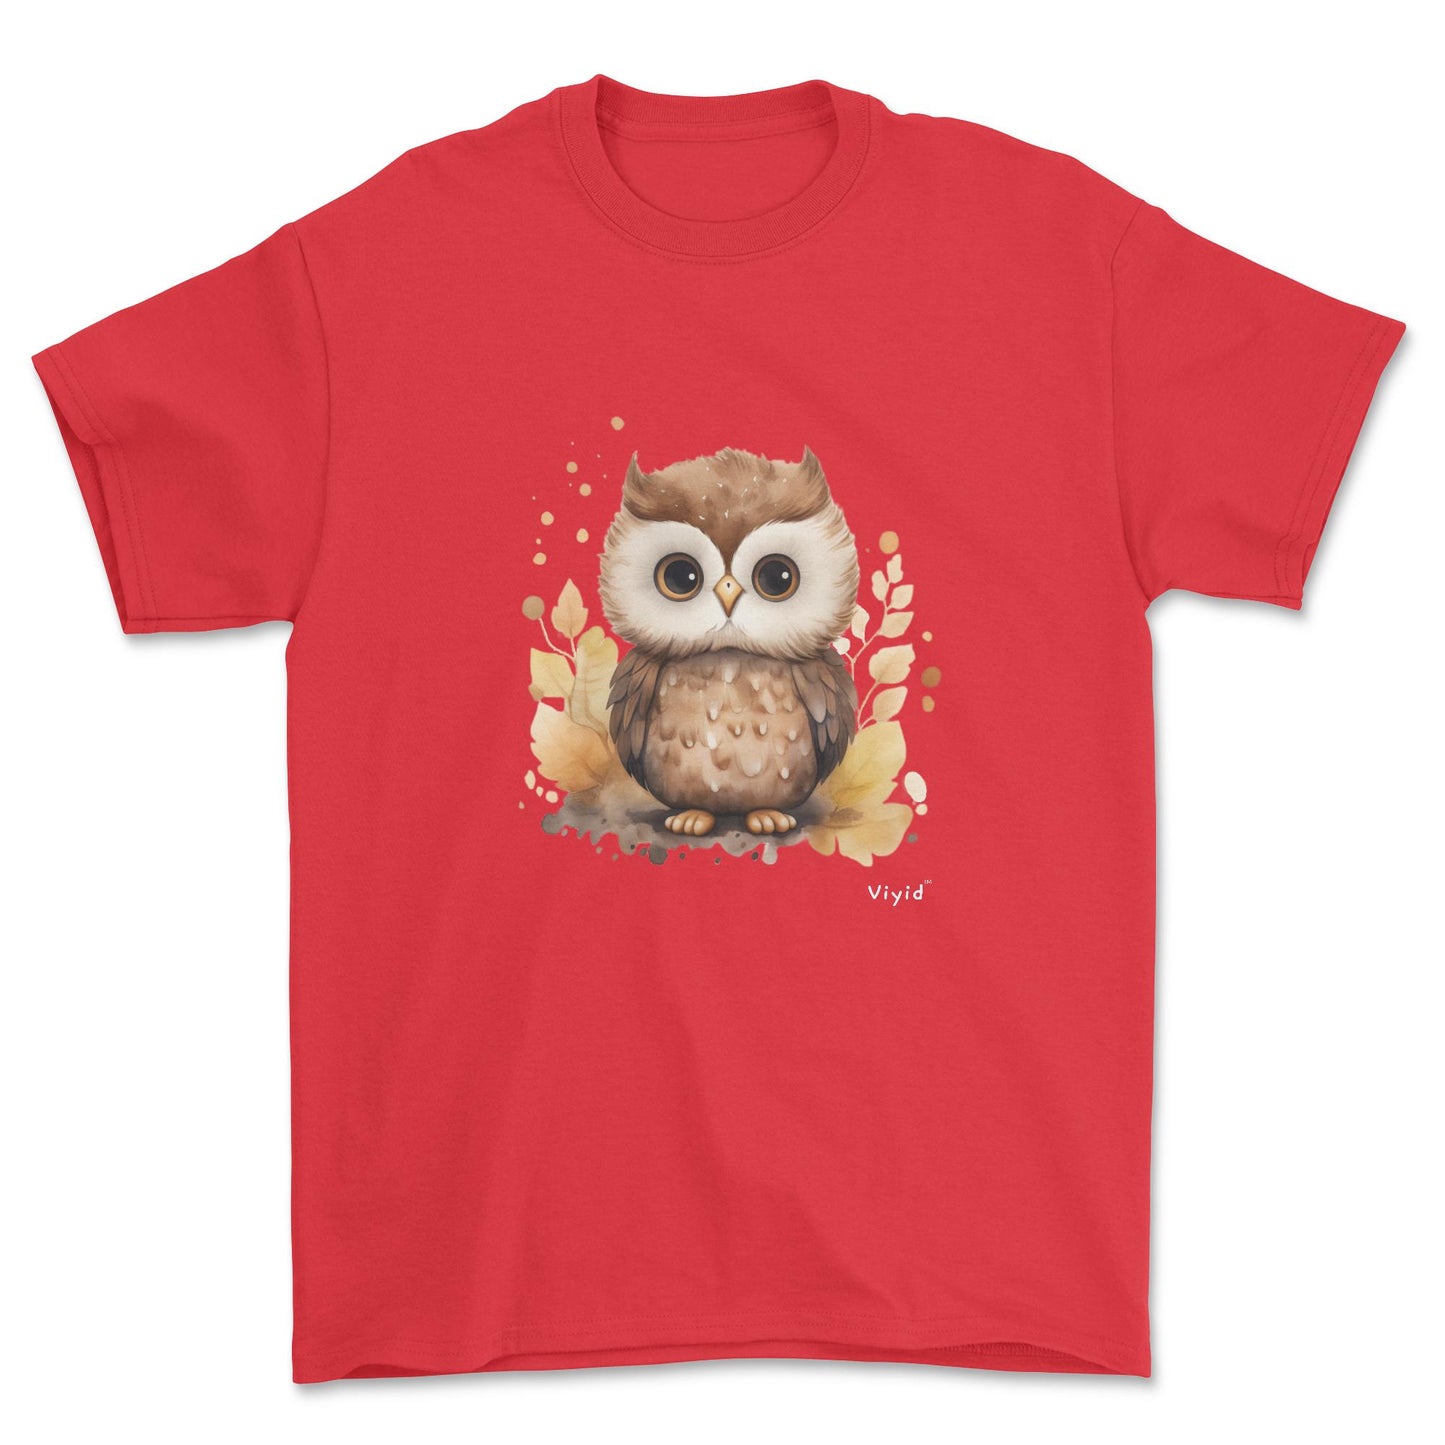 nocturnal owl youth t-shirt red